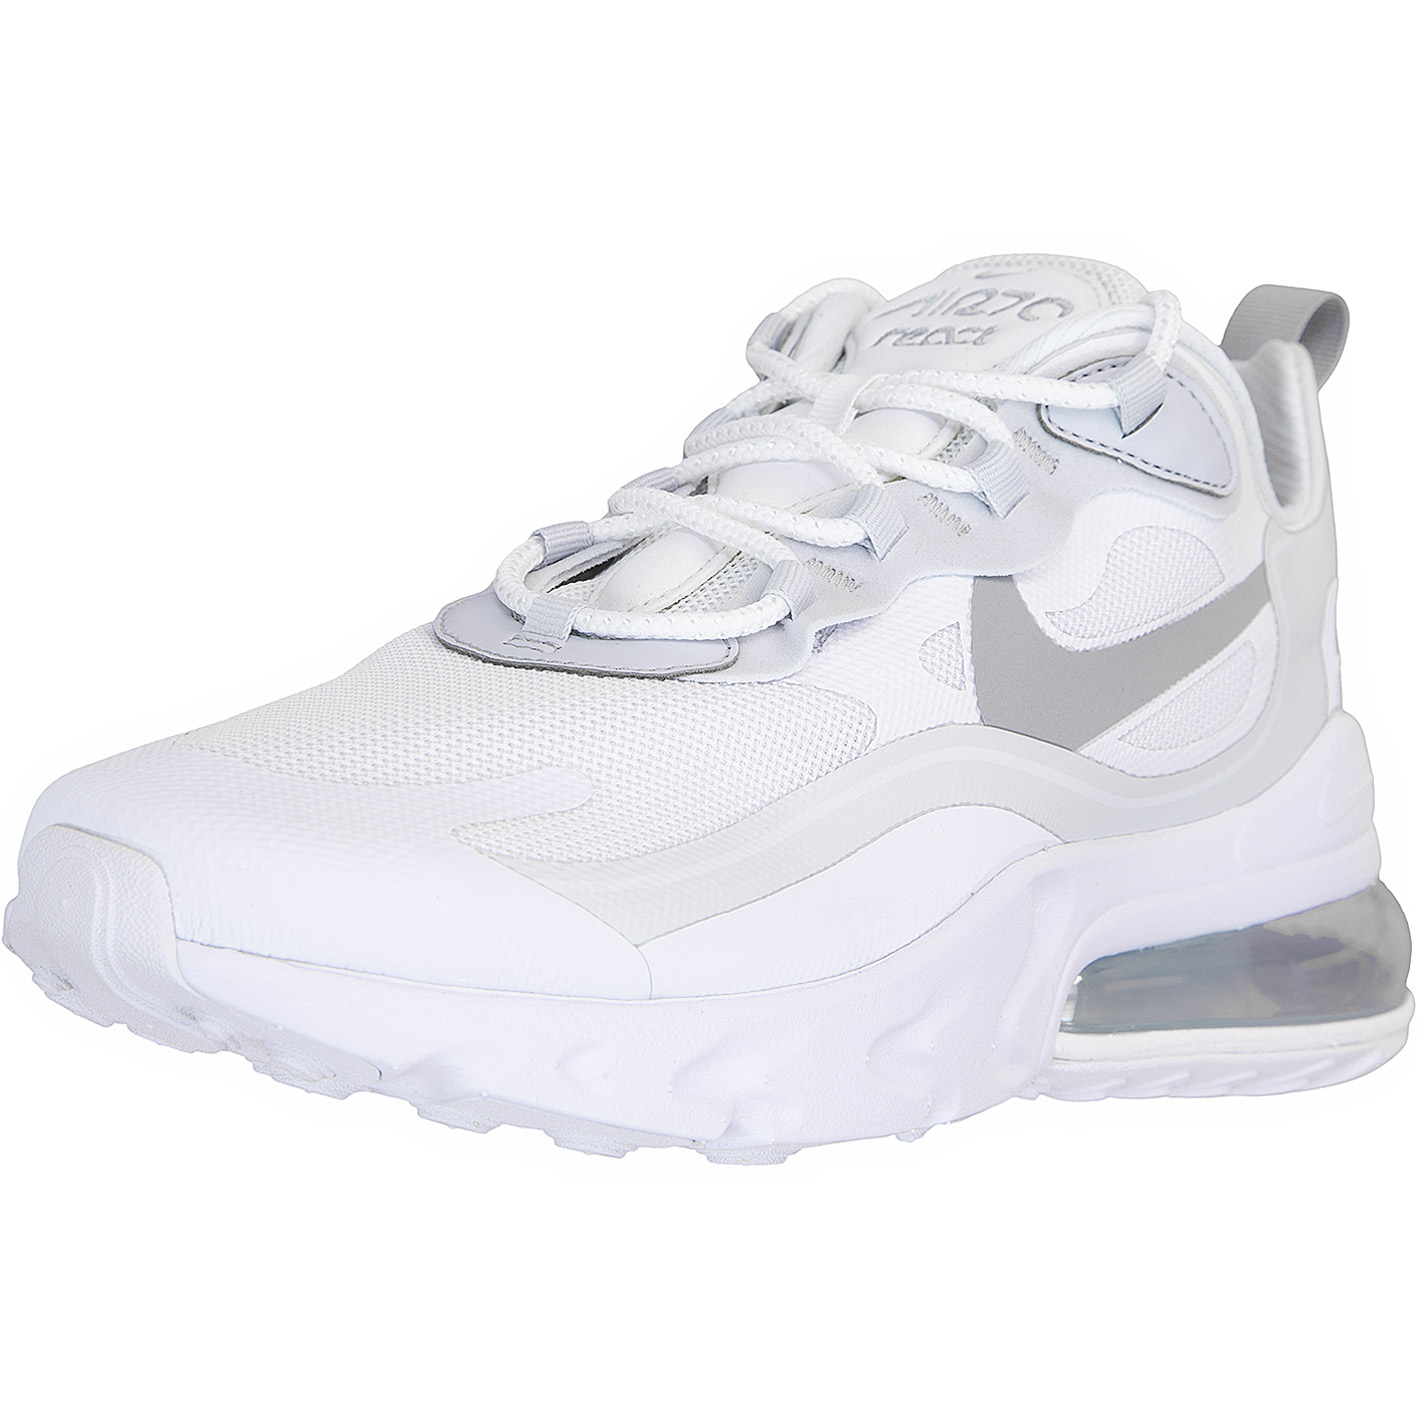 They are basin Discipline nike air max 270 react weiss shower sound elephant